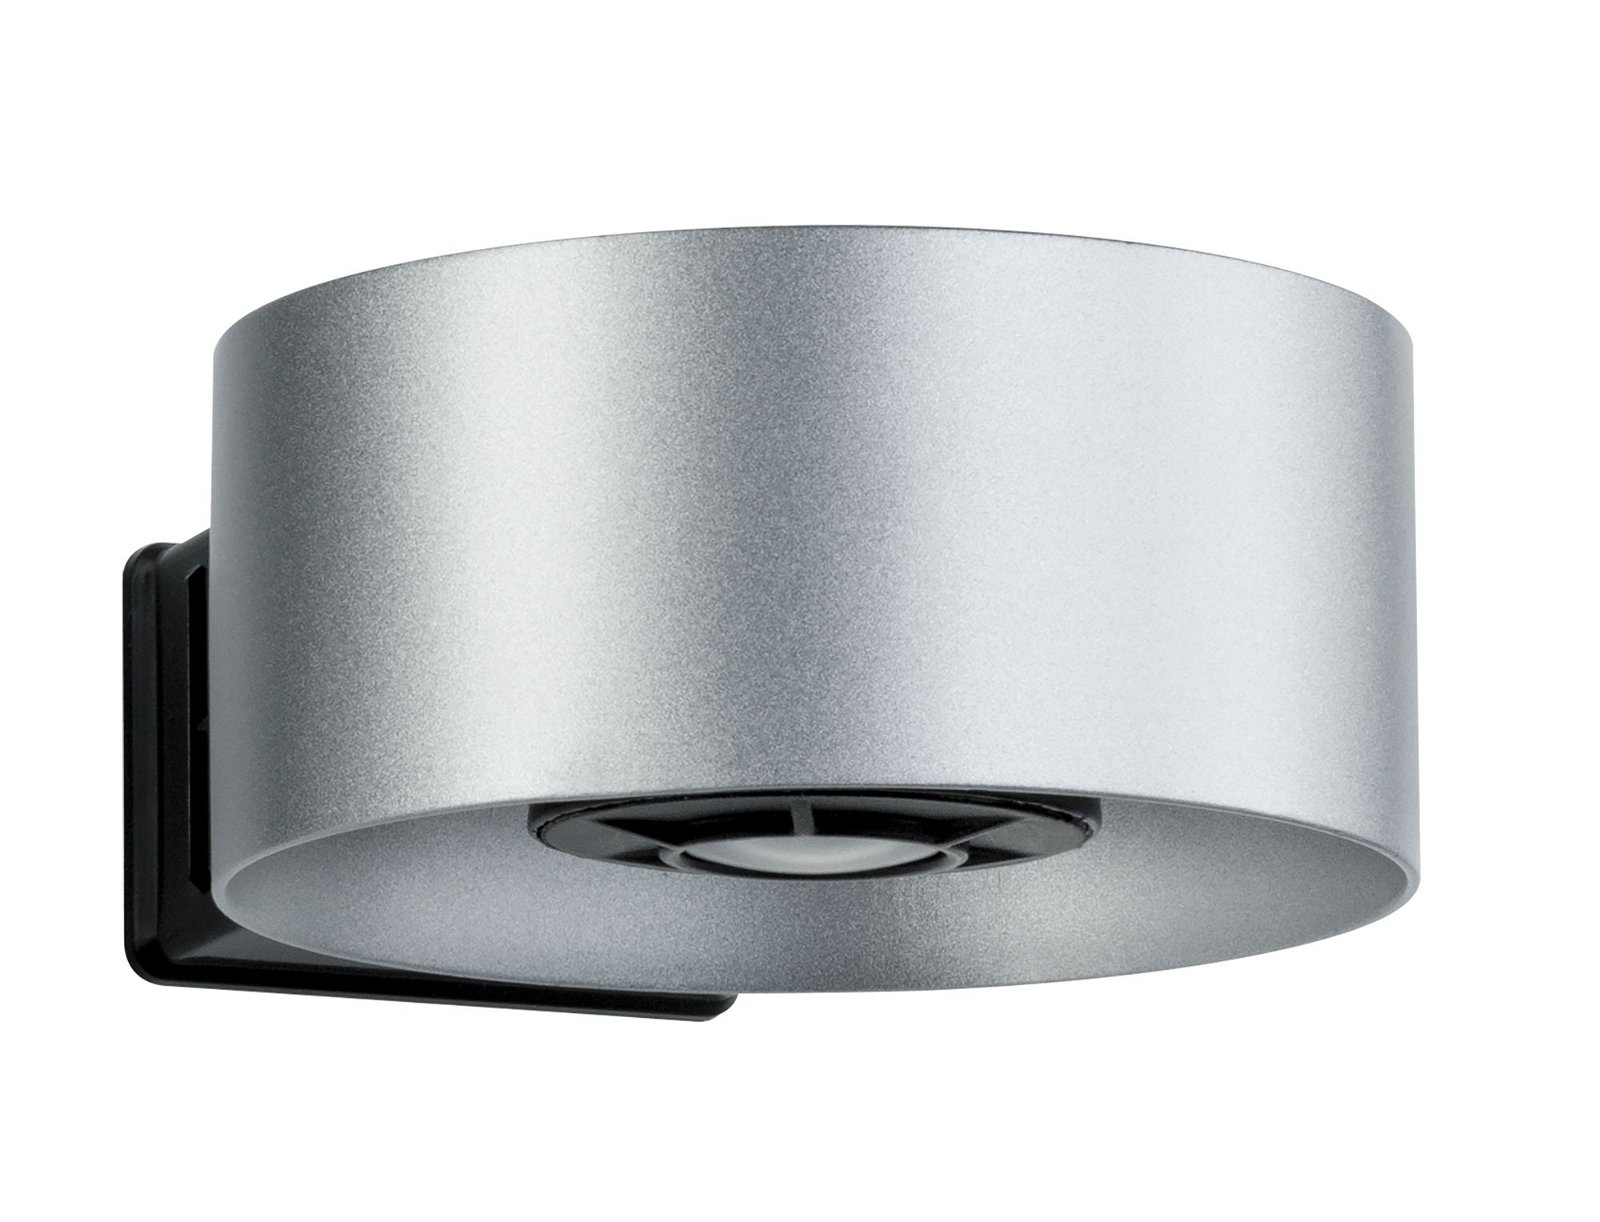 House wall luminaire Cone IP44 4,000 K 2 x 6 W silver/ Anthracite